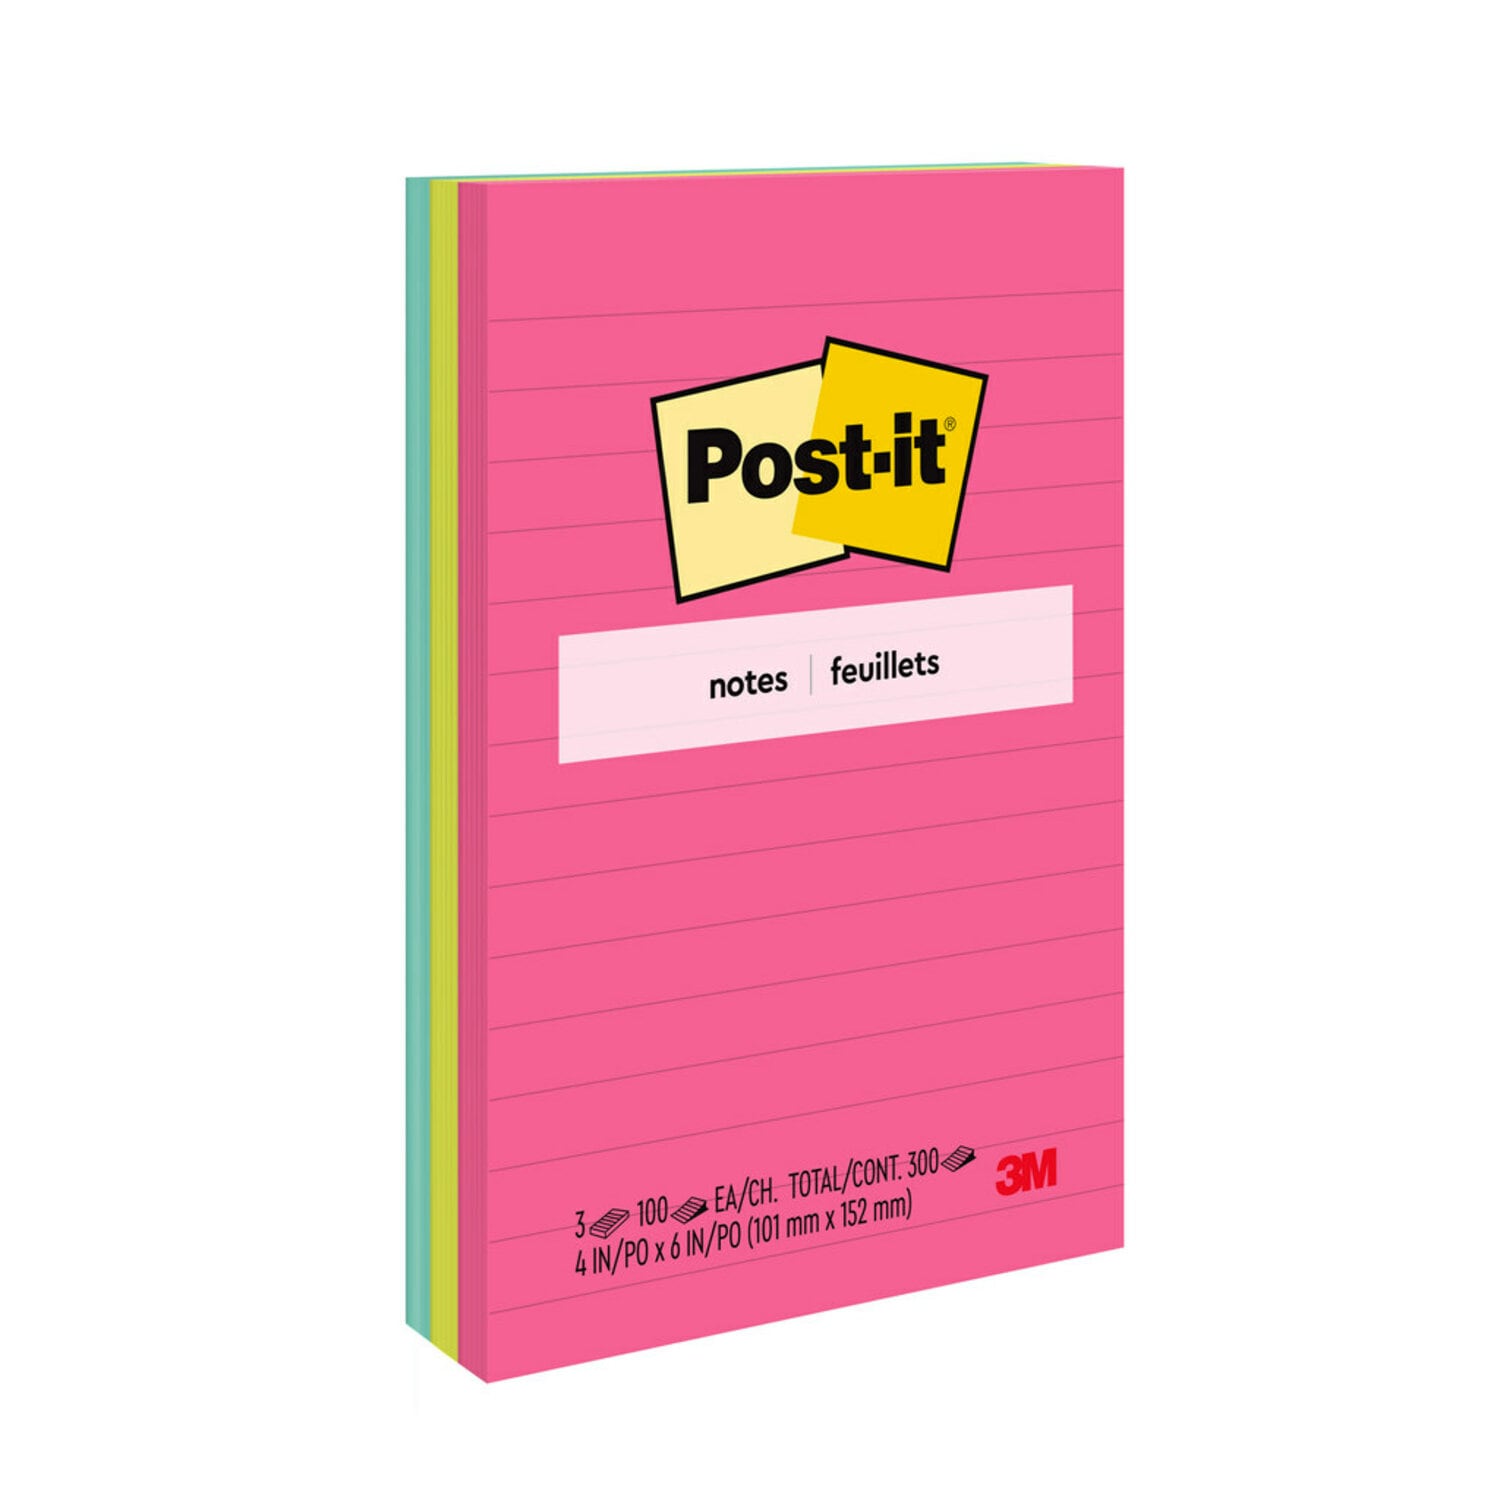 7100063131 - Post-it Notes 660-3AN, 4 in x 6 in (101 mm x 152 mm), Poptimistic Collection, Lined, 3 Pads/Pack